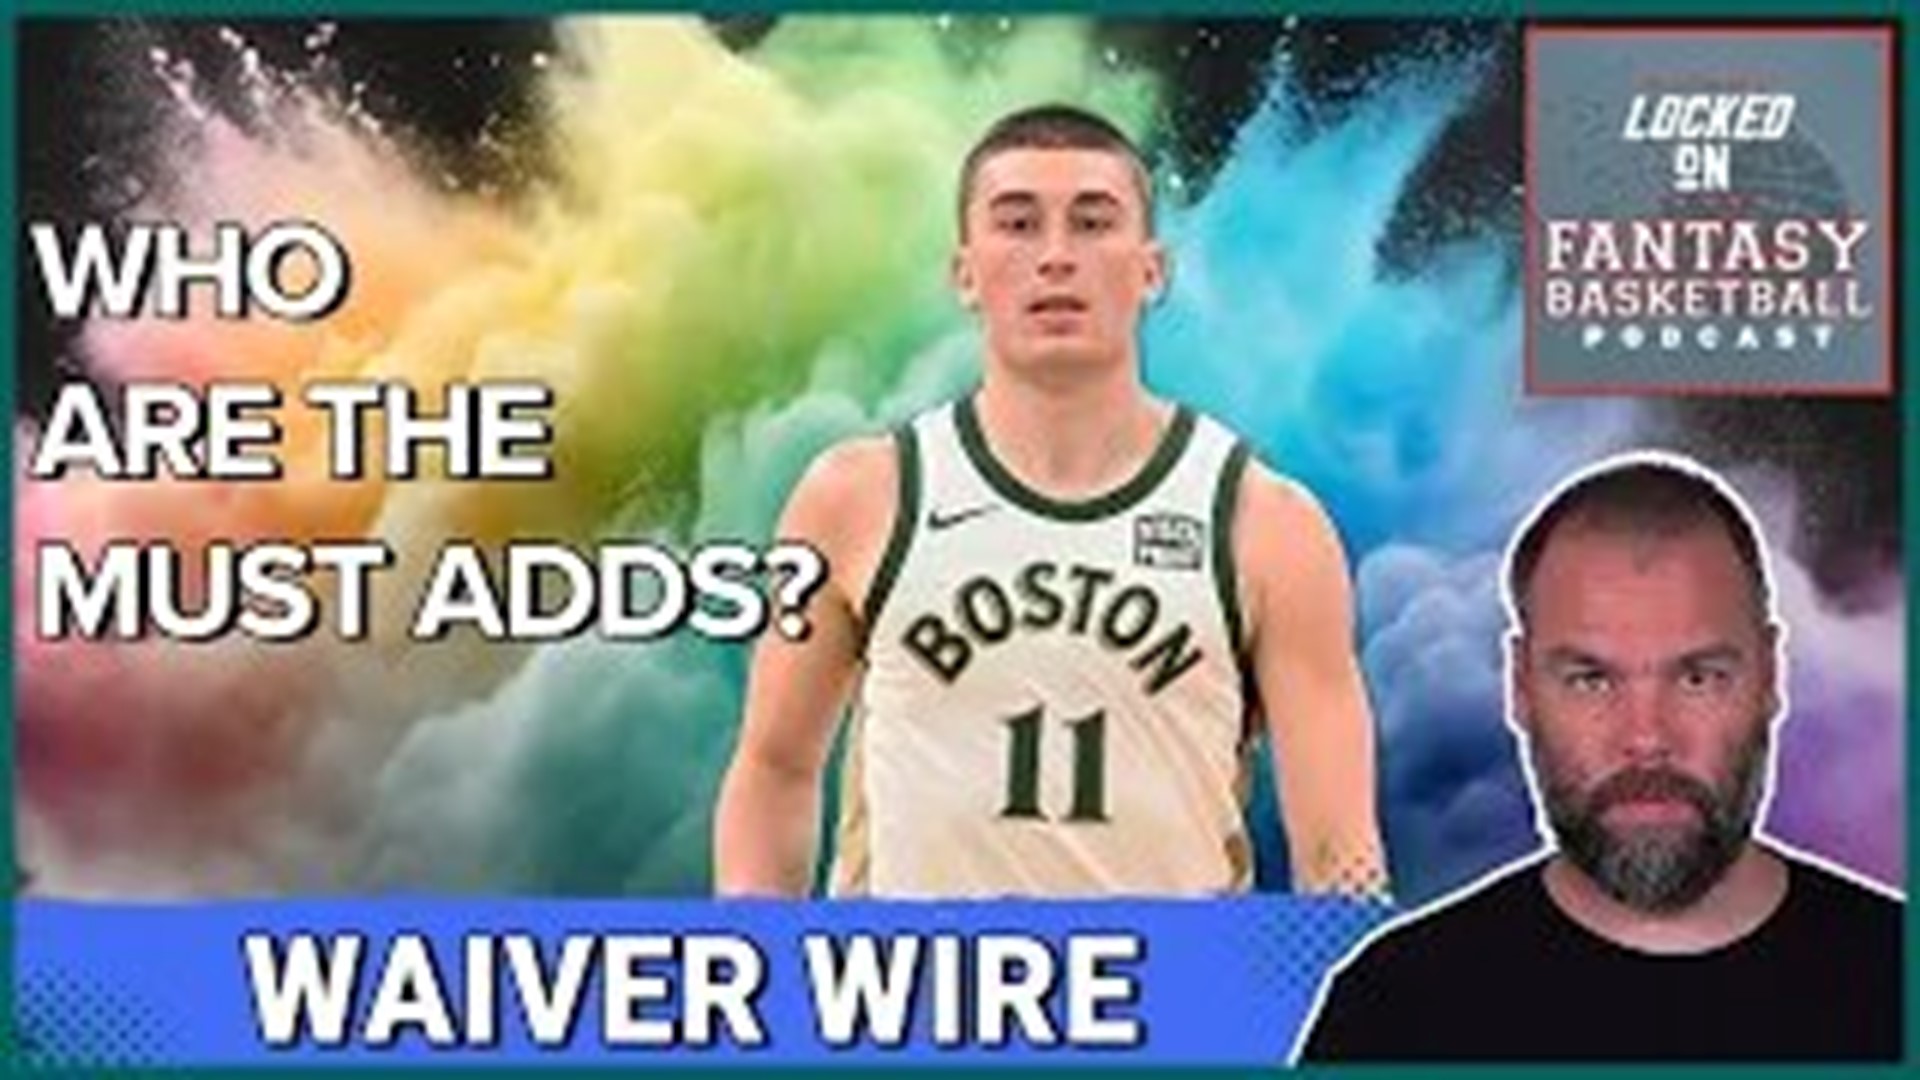 As the NBA season winds down to its final 2.5 weeks, Josh Lloyd is here to guide your fantasy basketball waiver wire decisions - With over 40 names!